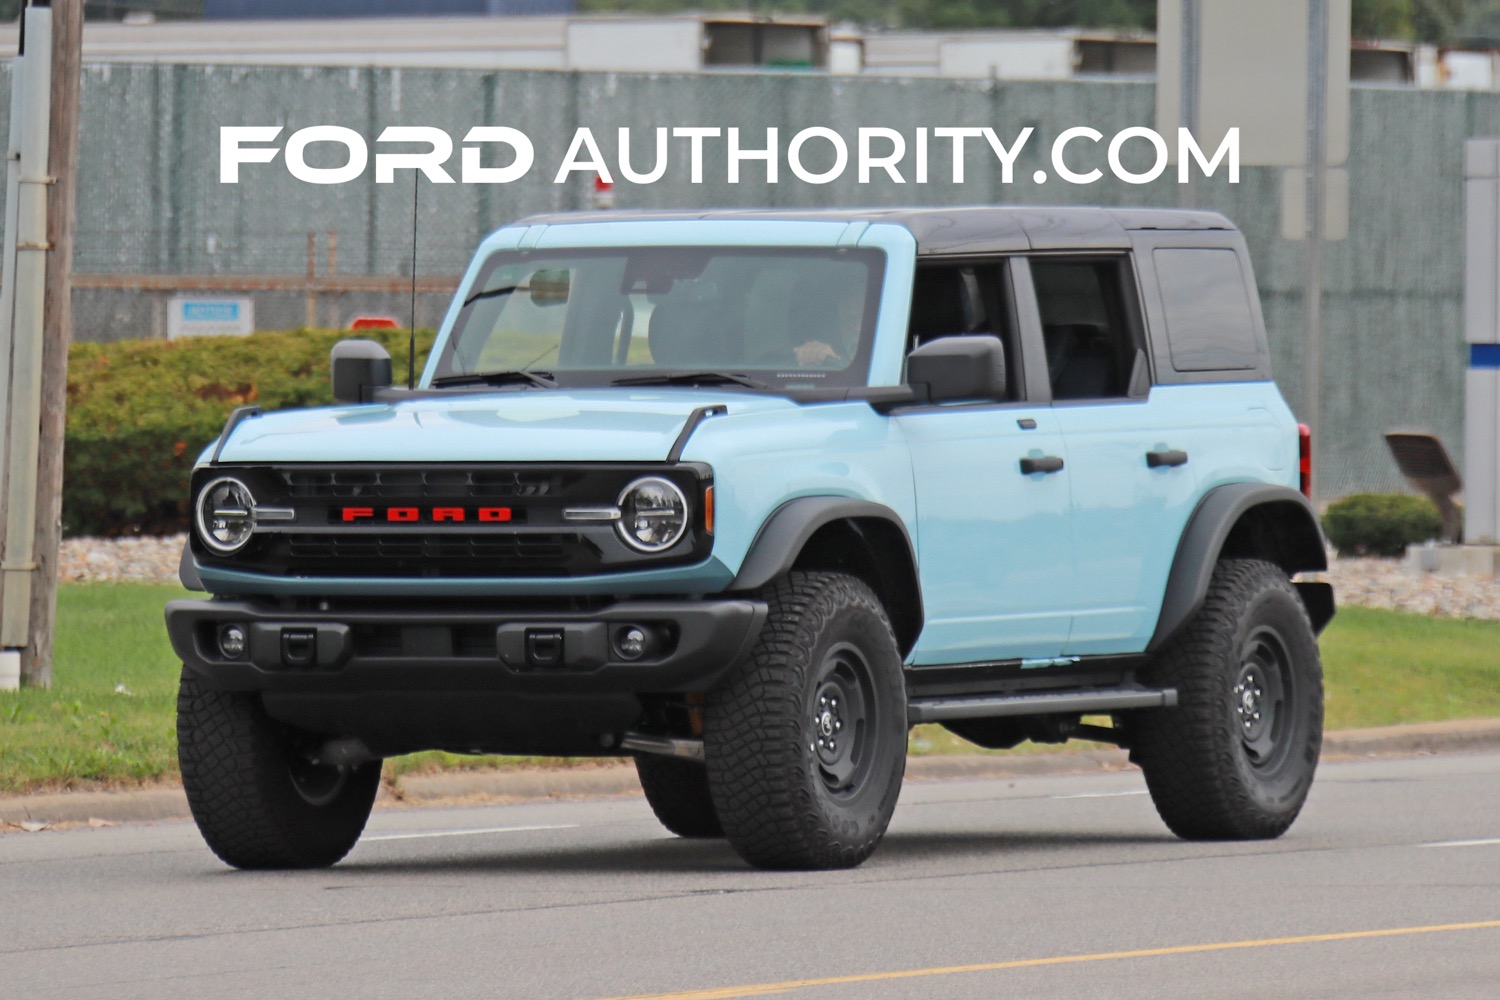 Bronco Robin's Egg Blue + Black Grill + Black Painted MOD Top Bronco Heritage Spotted 2023-Ford-Bronco-Prototype-Spy-Shots-Robins-Egg-Blue-Potential-Heritage-Edition-with-Black-Acc